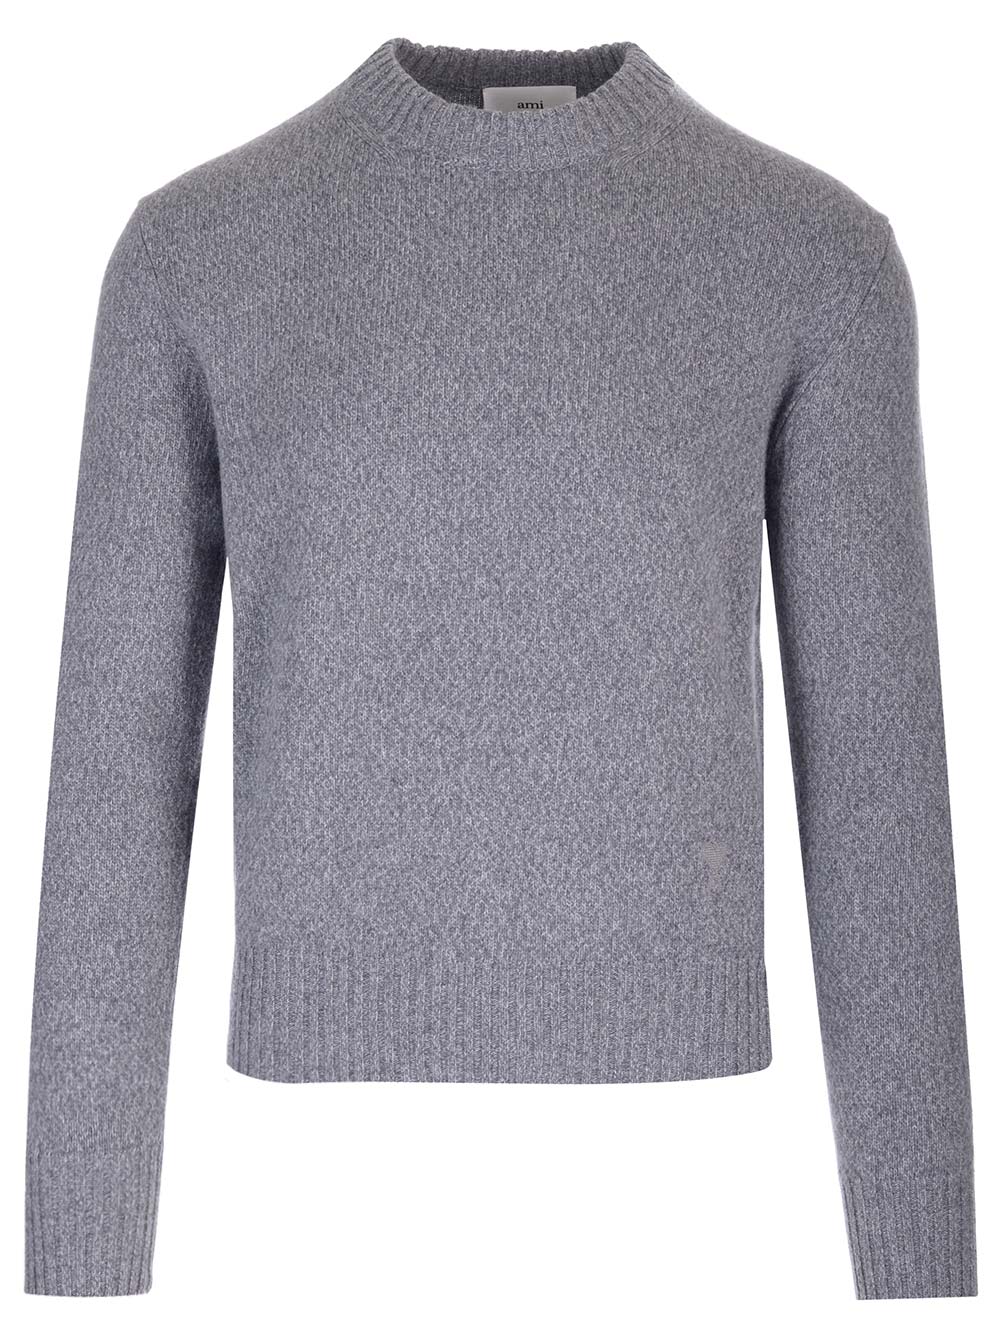 Ami Alexandre Mattiussi Cashmere And Wool Sweater In Gray